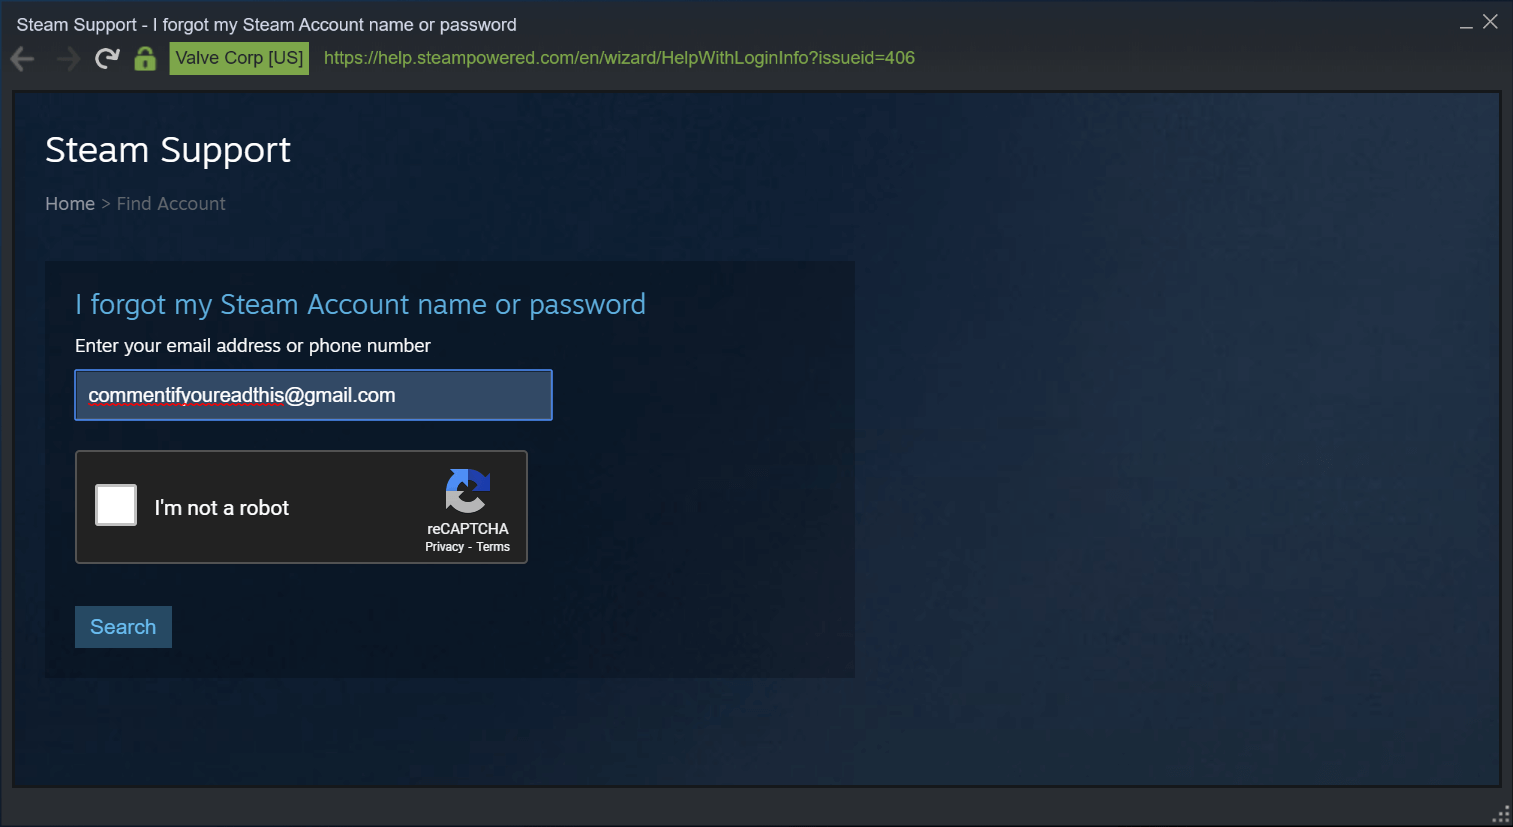 How to Recover Your Steam Account Lost Password?